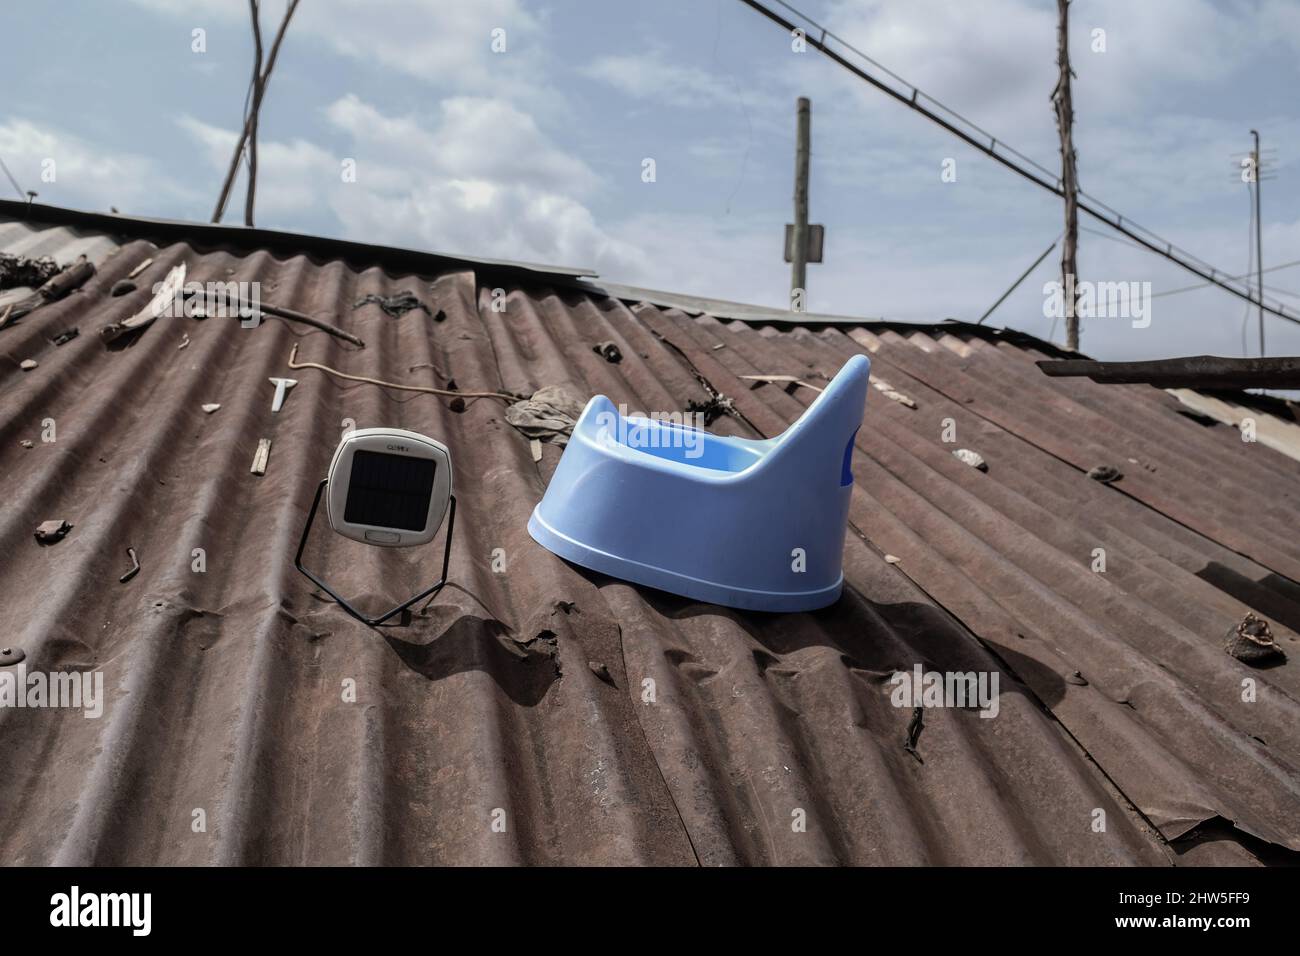 A solar powered lamp charging on roof of a building structure in Kibera Slums, Nairobi. Thousand of households in Kenya's Kibera Slums depend on elect Stock Photo